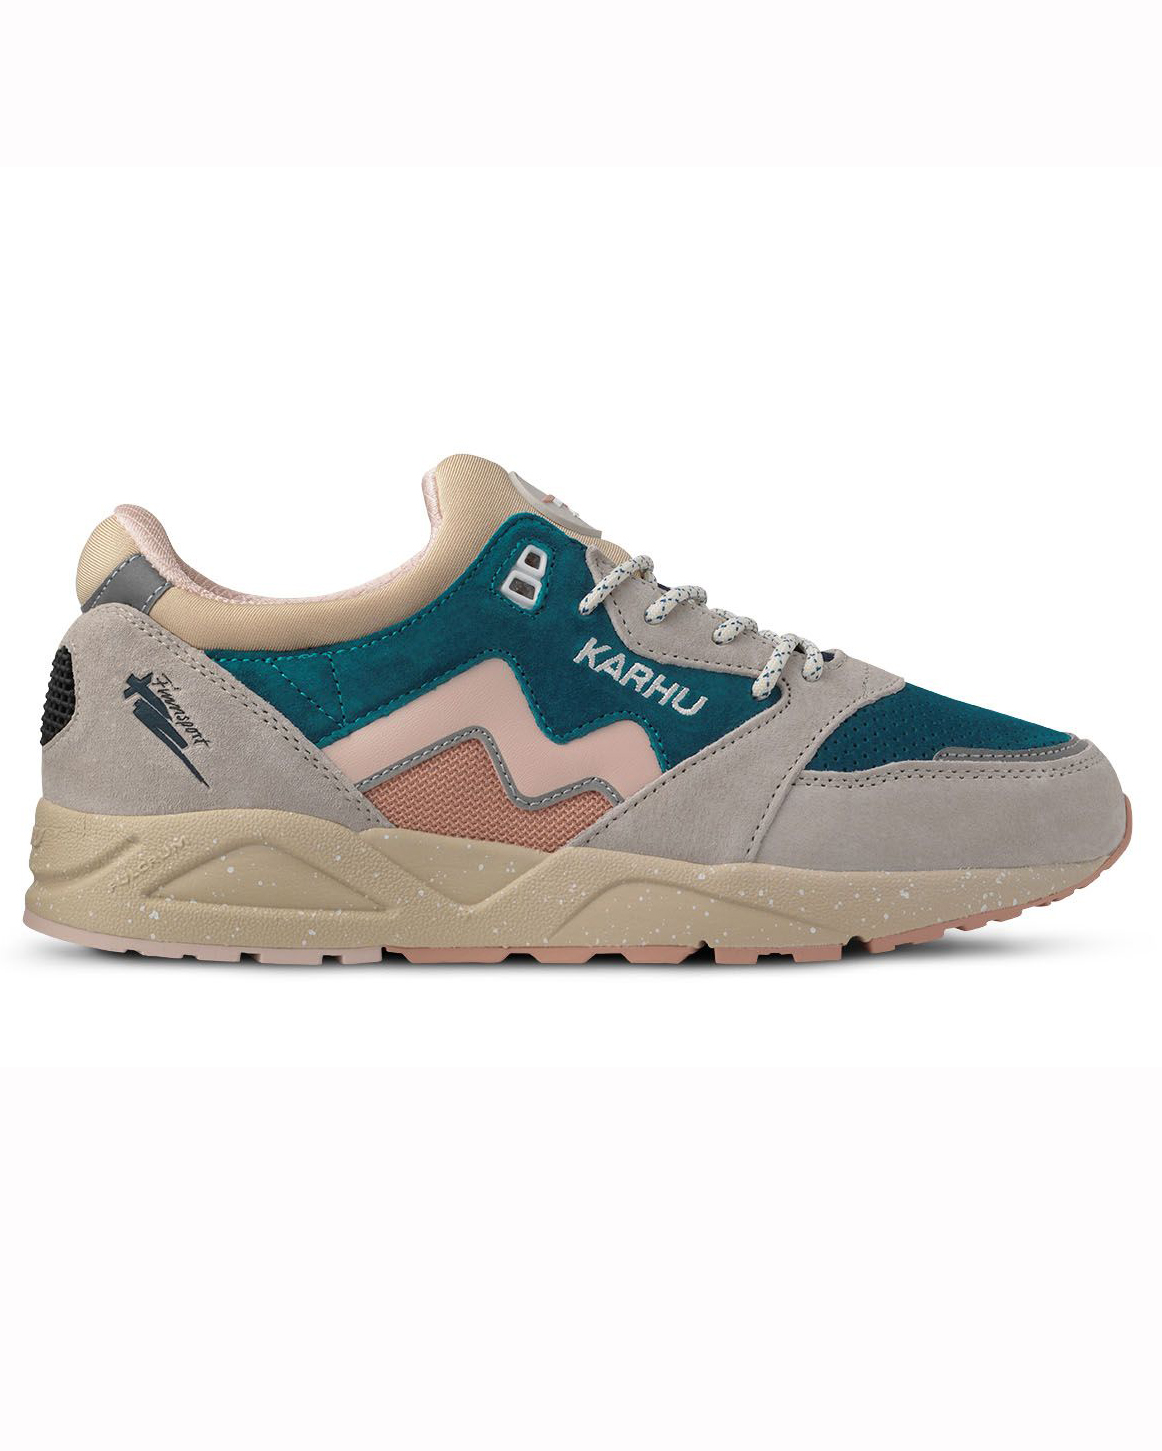 Sneakers Aria 95 - Silver Lining/ Peach Whip  - 39